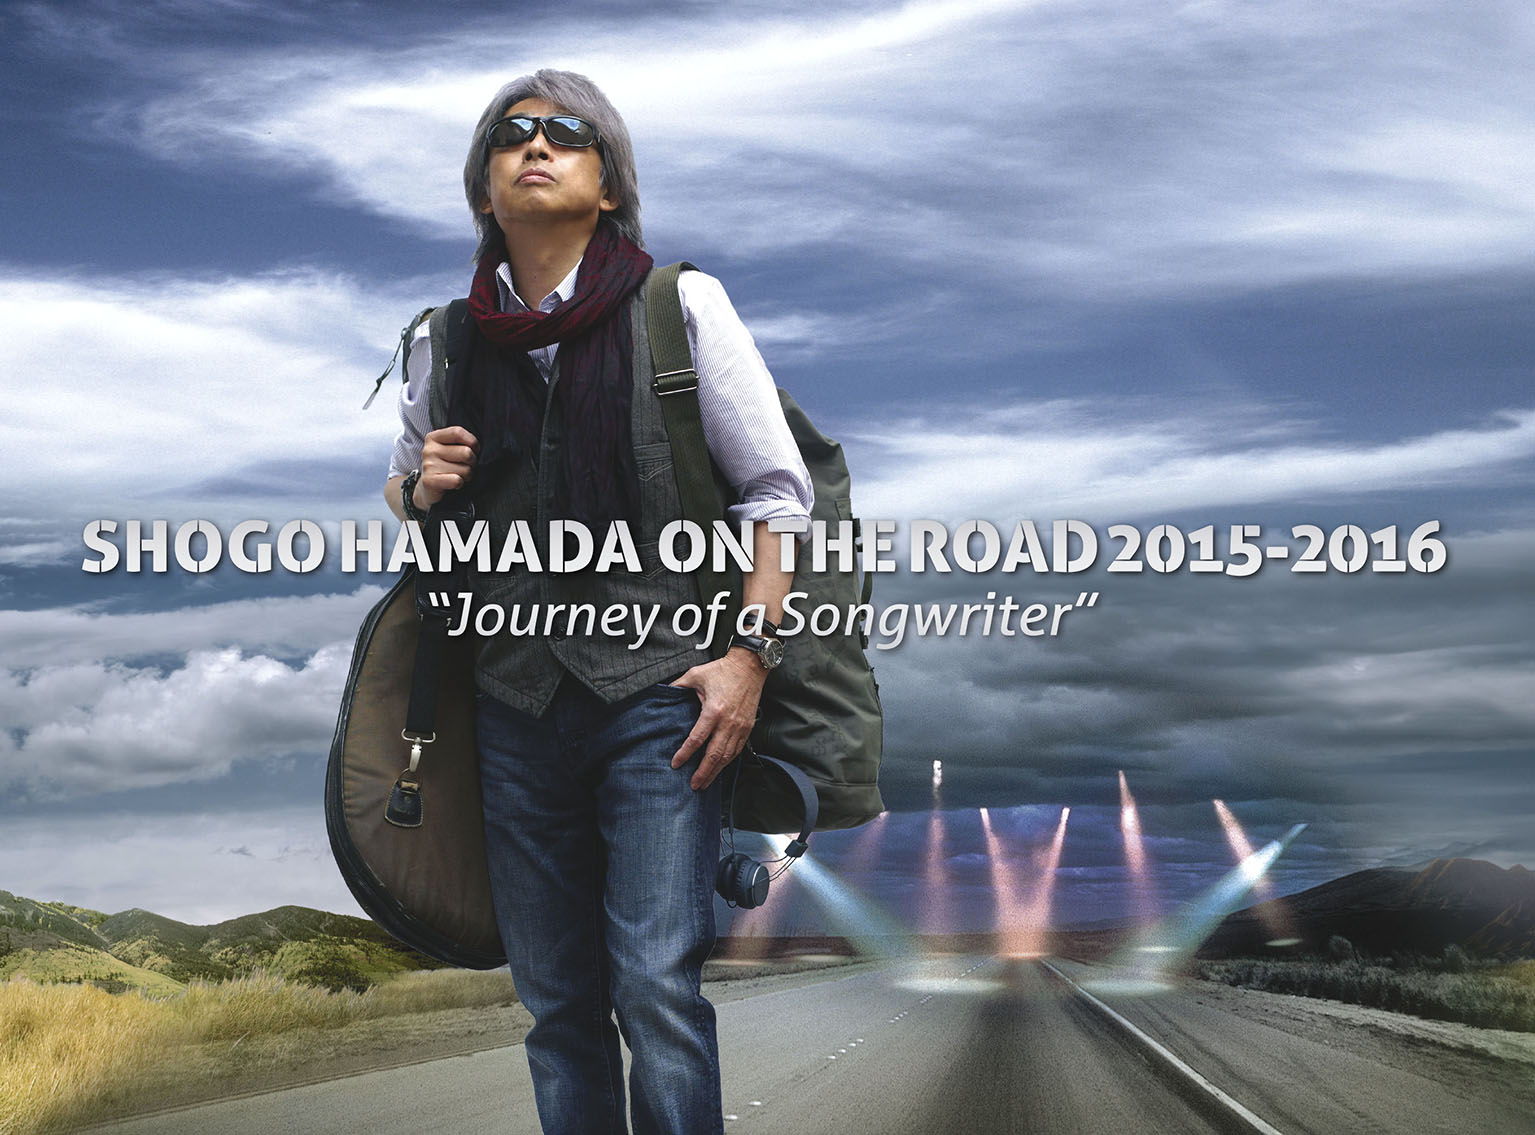 SHOGO HAMADA ON THE ROAD 2015-2016“Journey of a Songwriter”(完全生産限定盤)【Blu-ray】画像